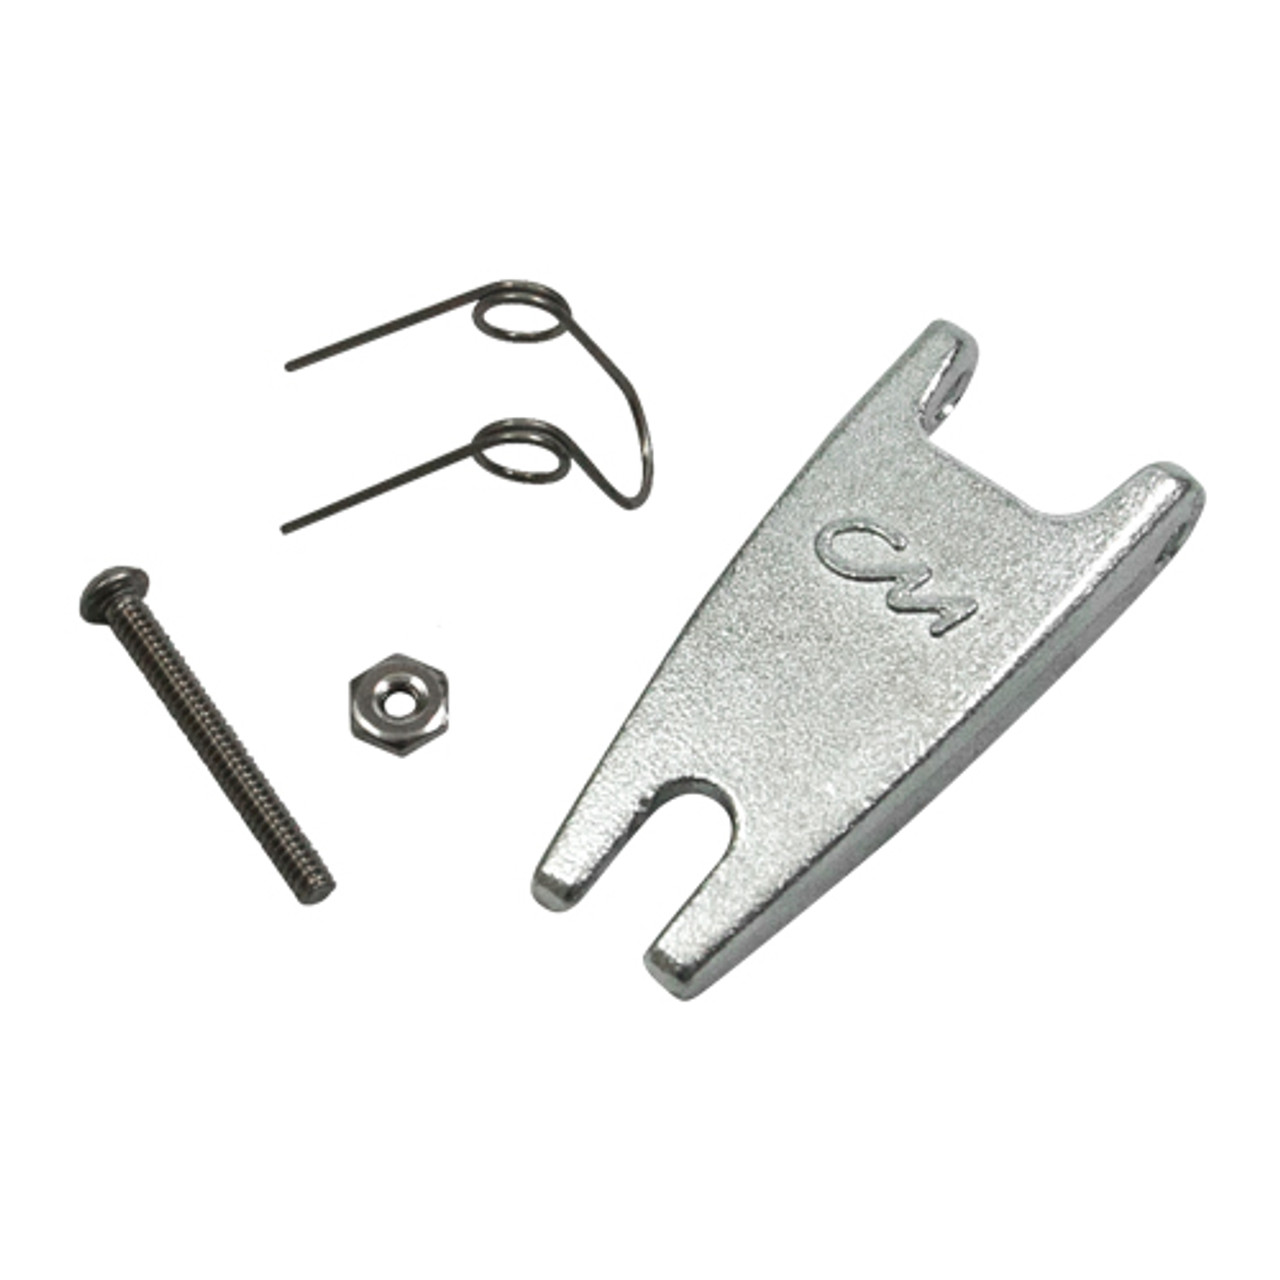 https://cdn11.bigcommerce.com/s-11cqjpjngs/images/stencil/1280x1280/products/59419/73279/cm-3-8-latch-kit-for-clevis-sling-hook-35__40940.1649102552.jpg?c=1